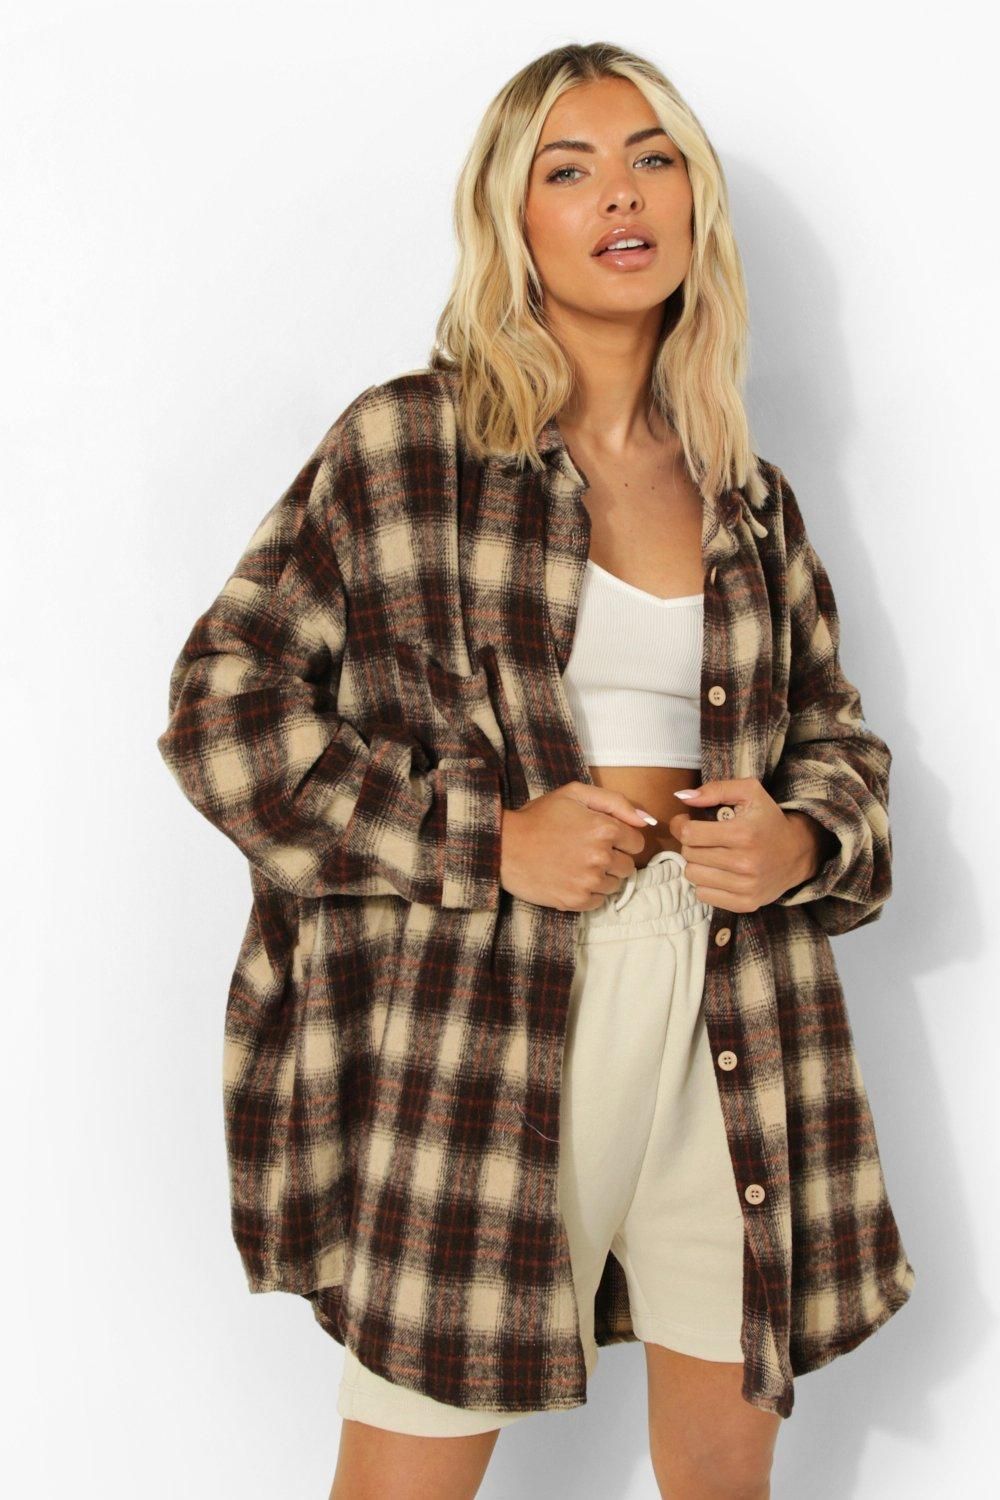 Wear the flannel shirt with different
styles to look trendy